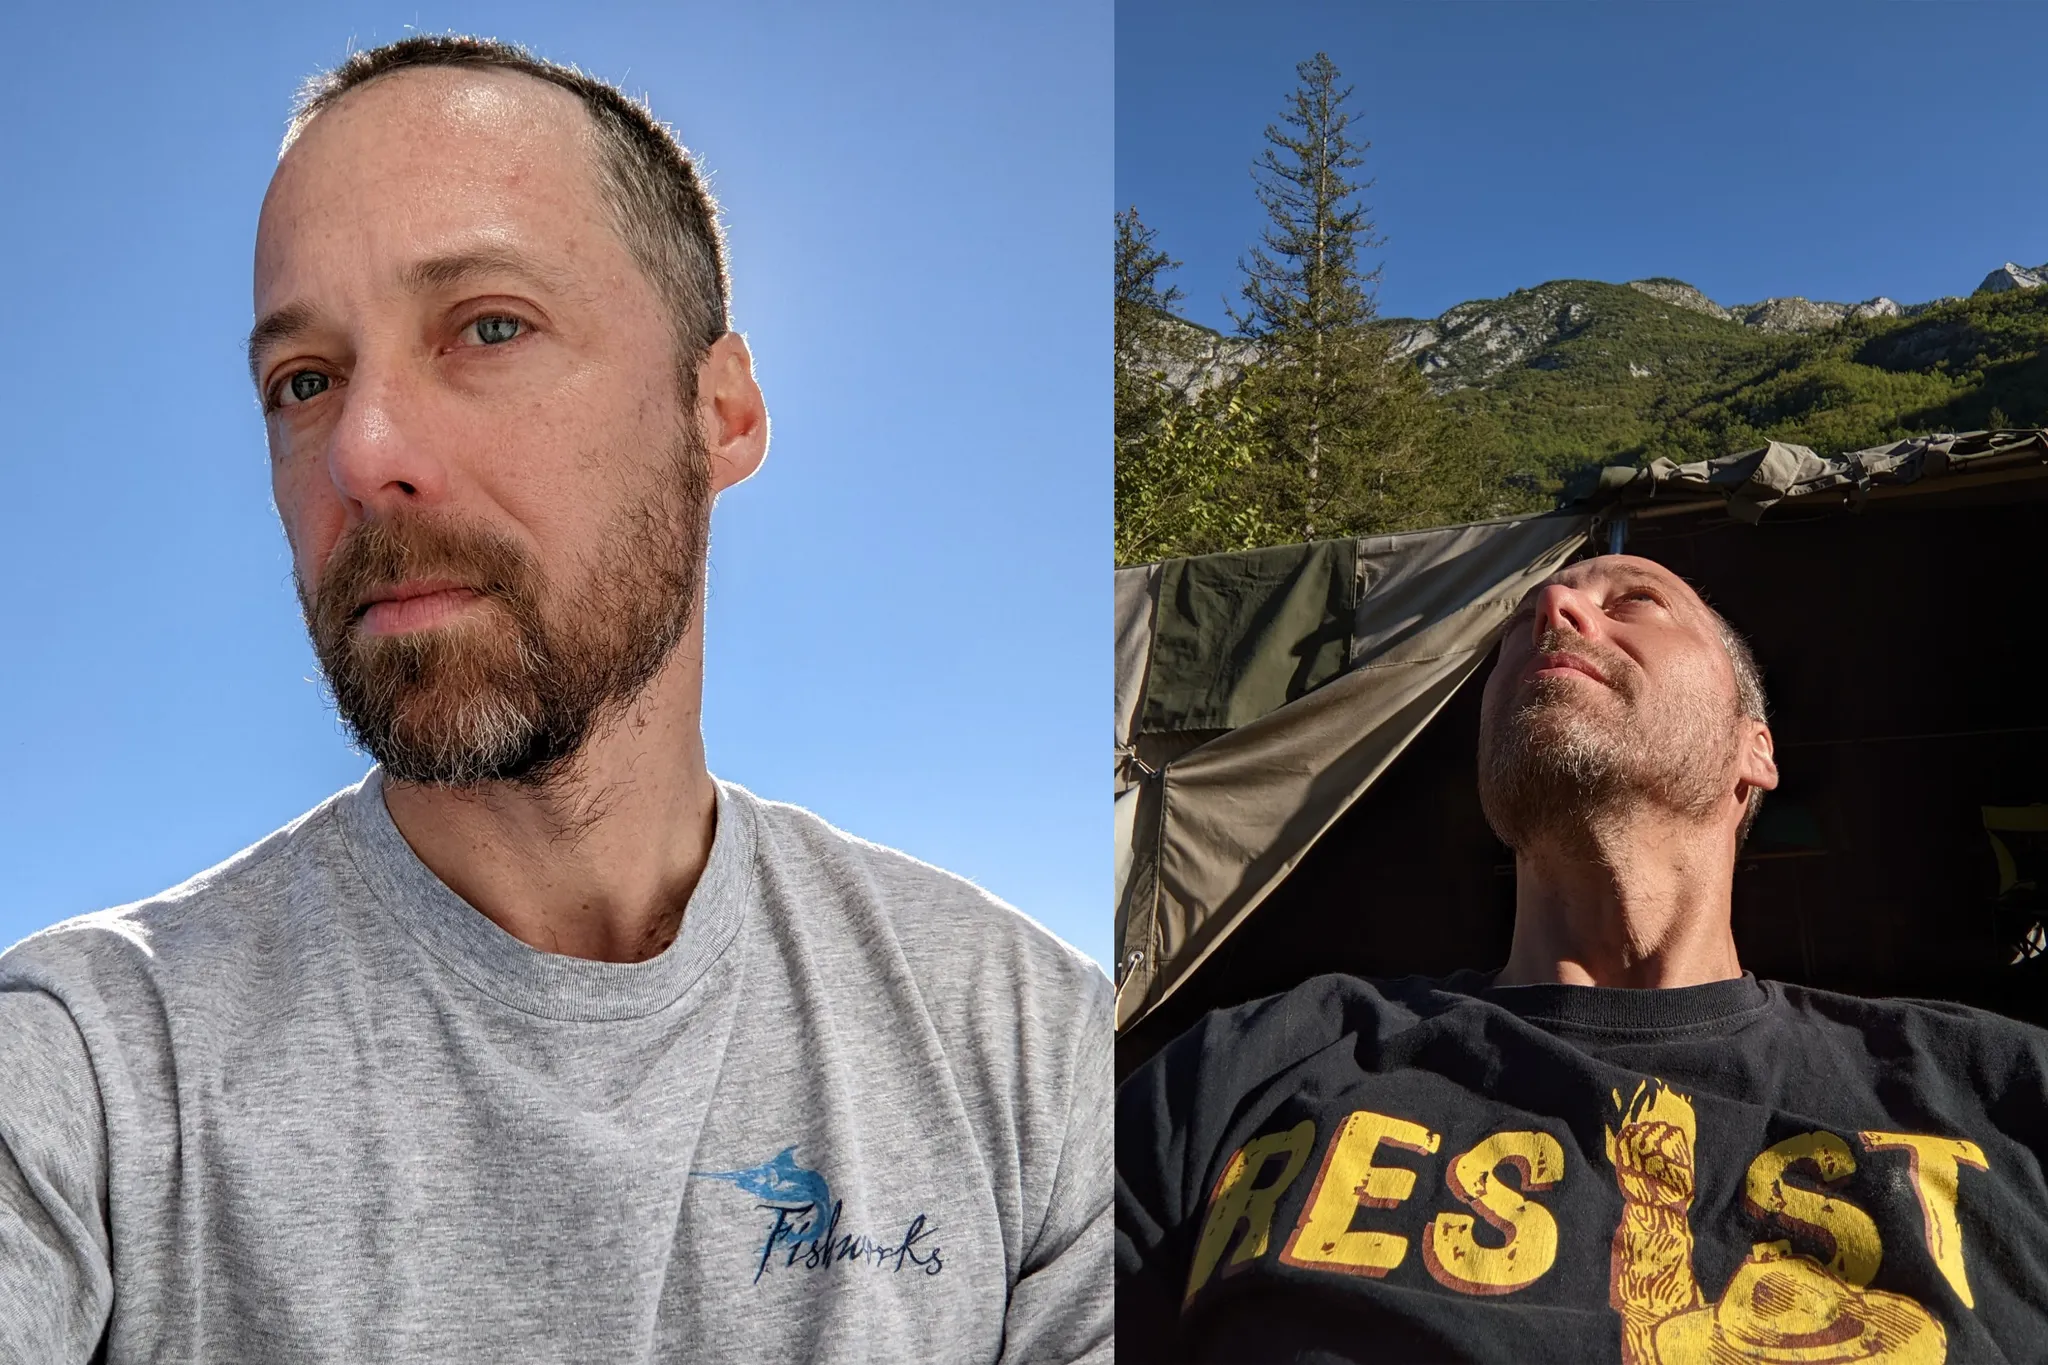 Two photos of August Black, one in gray long sleeve shirt with blue sky behind, another portrait shot from below and looking upwards with T-shirt that says &lsquo;resist&rsquo;